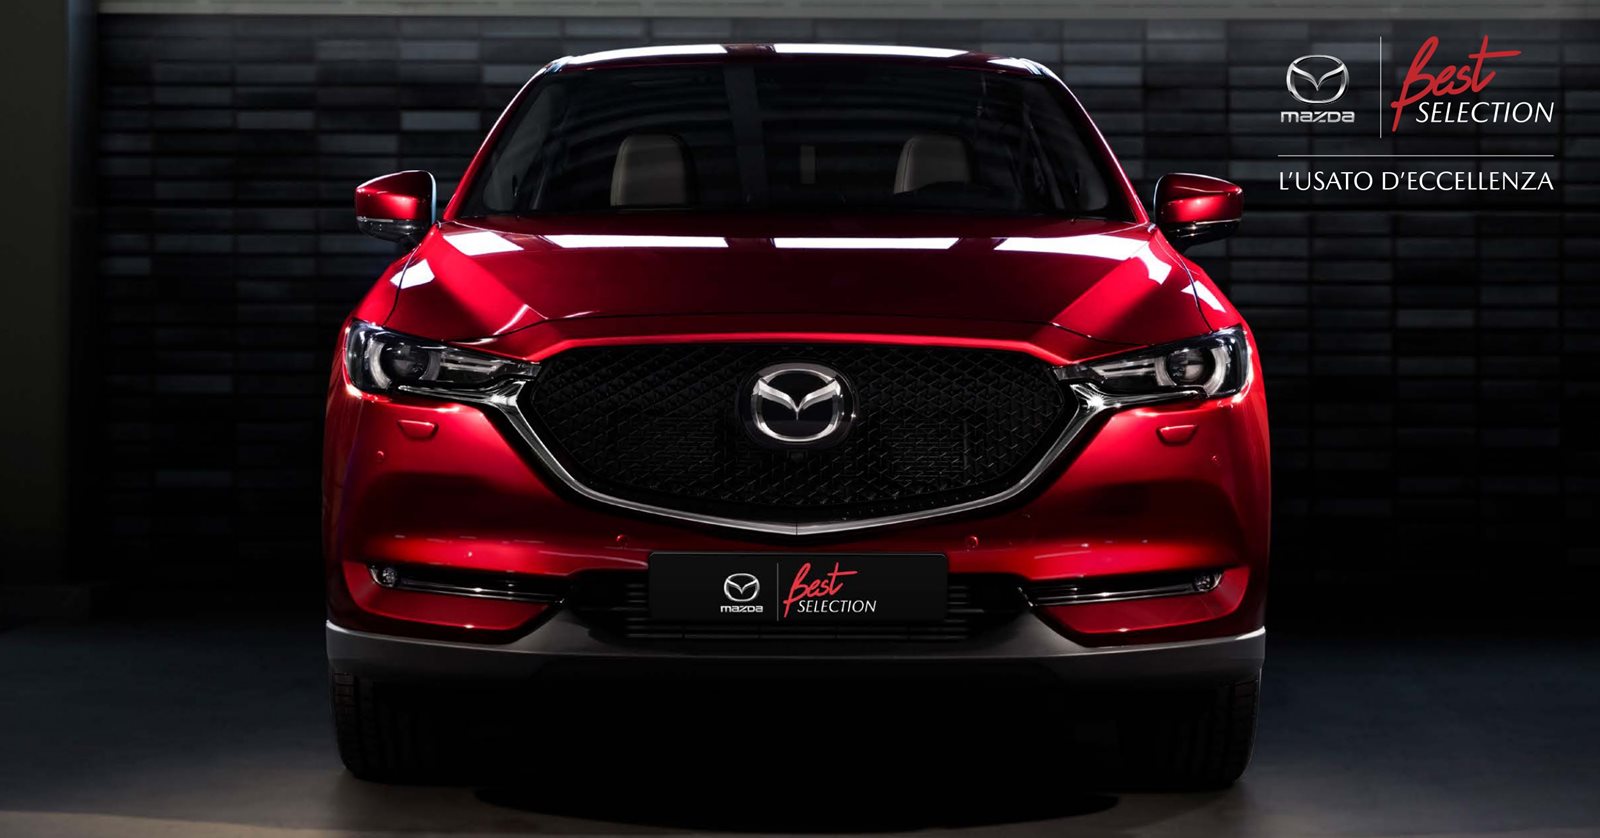 Mazda Best Selection, auto usate speciali